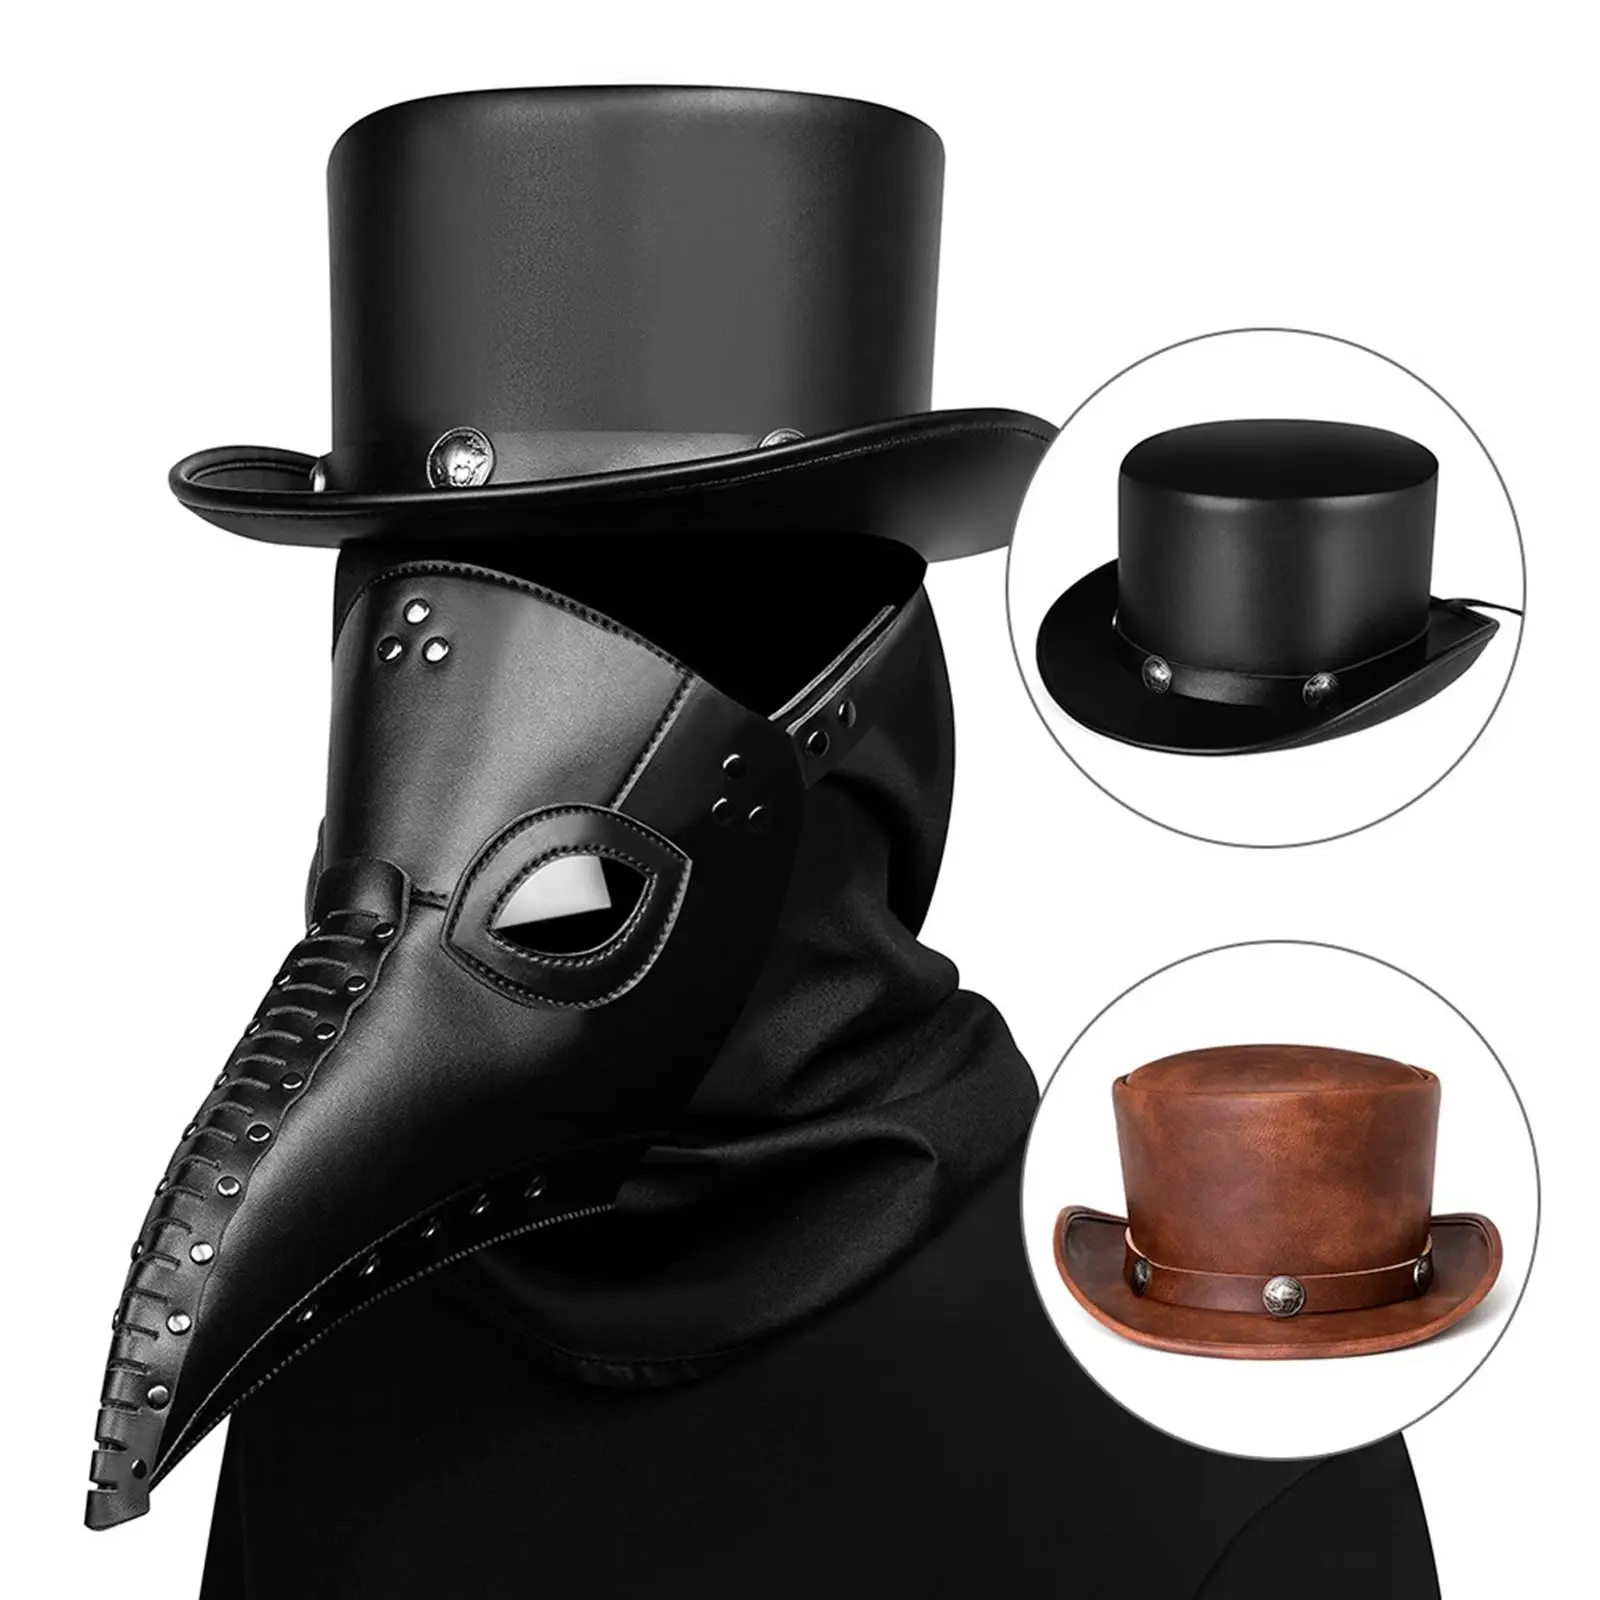 Unisex Magician Top Hat One Size Fits Most Adults Stovepipe Victorian Leather Headwear with Rivet for Men Showman Costume Circus